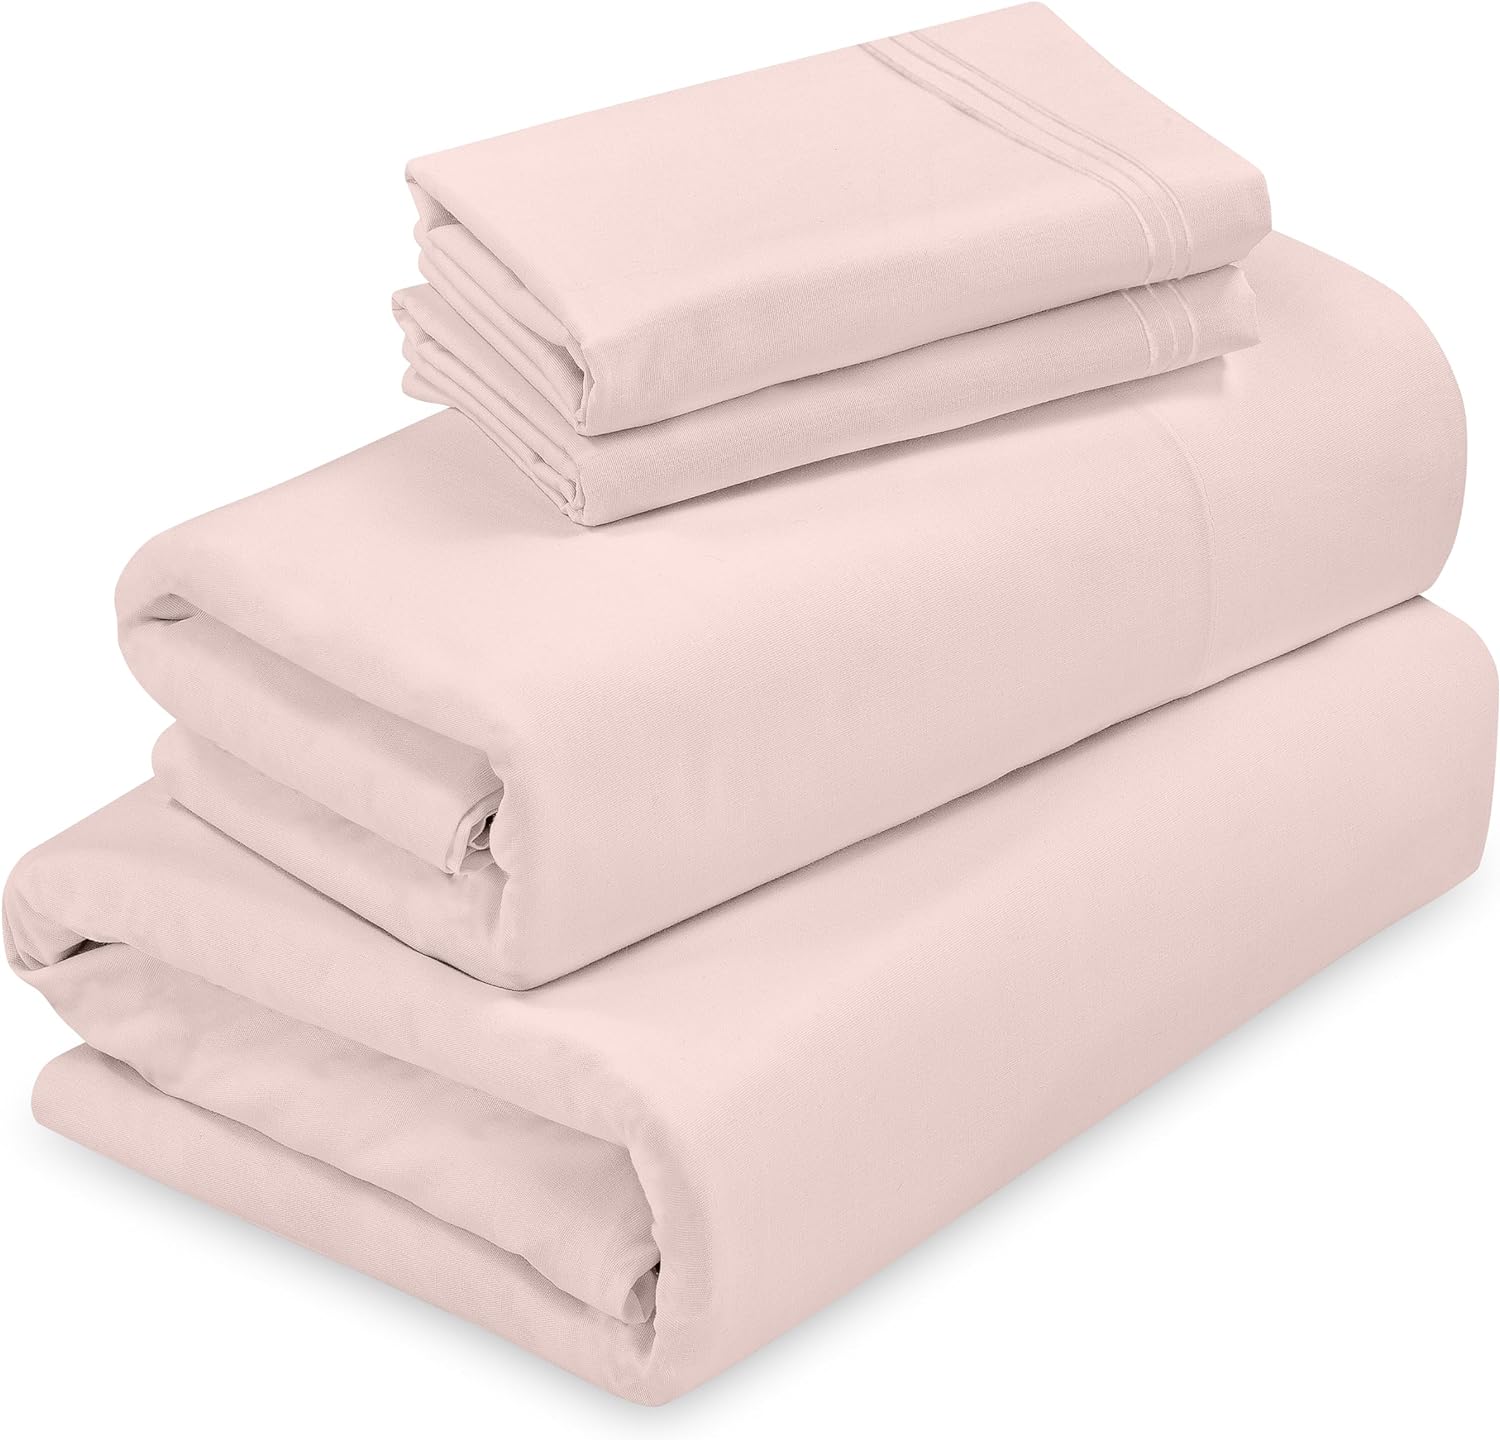 ROYALE LINENS - 4 Piece Queen Bed Sheet - Soft Brushed Microfiber 1800 Bedding Set - 1 Fitted Sheet, 1 Flat Sheet, 2 Pillow case - Wrinkle Fade &Resistant Luxury Queen Size Sheet Set (Queen, Pink)